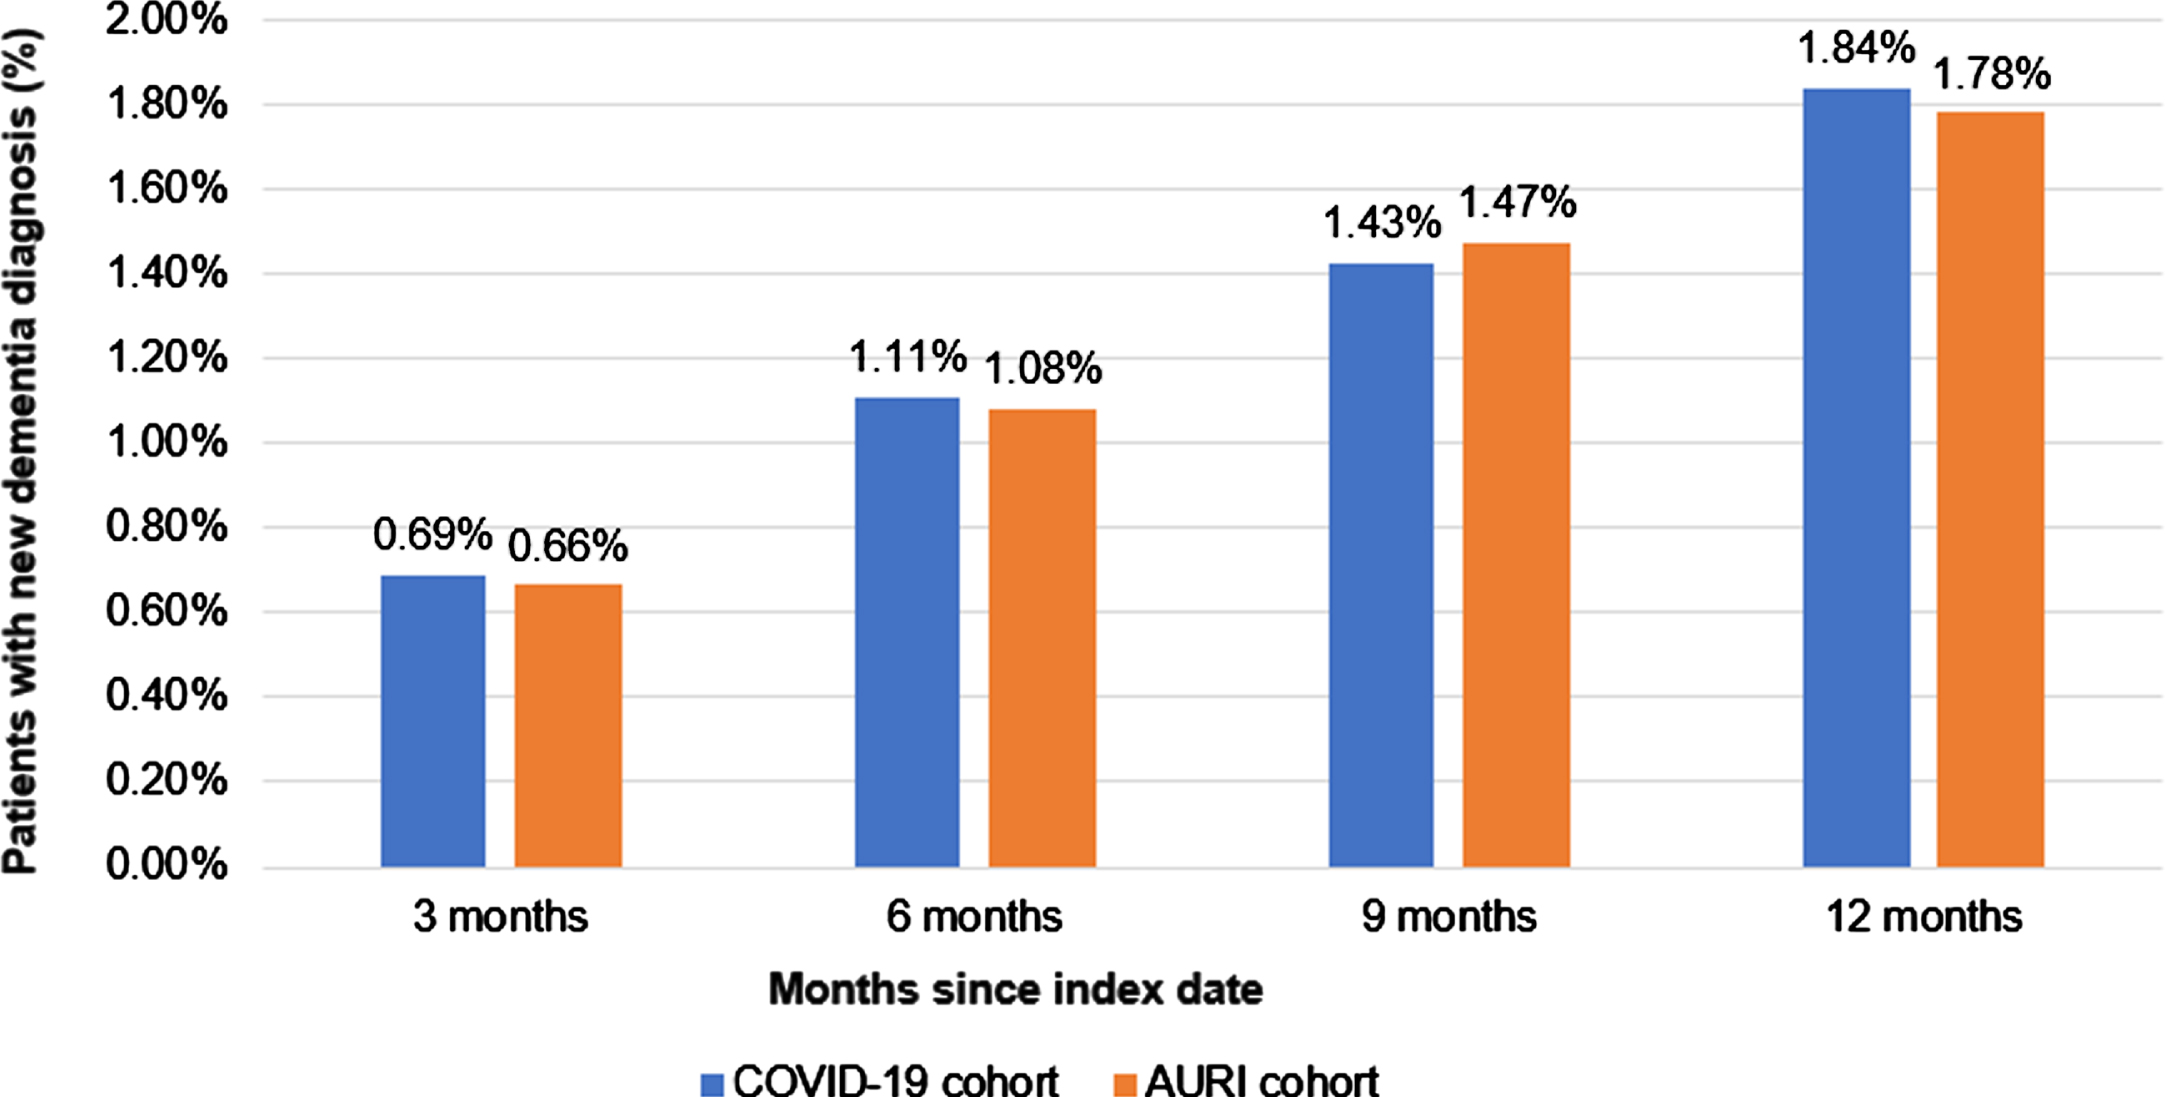 Cumulative incidence of dementia in patients with COVID-19 or AURI within 12 months of the index date.